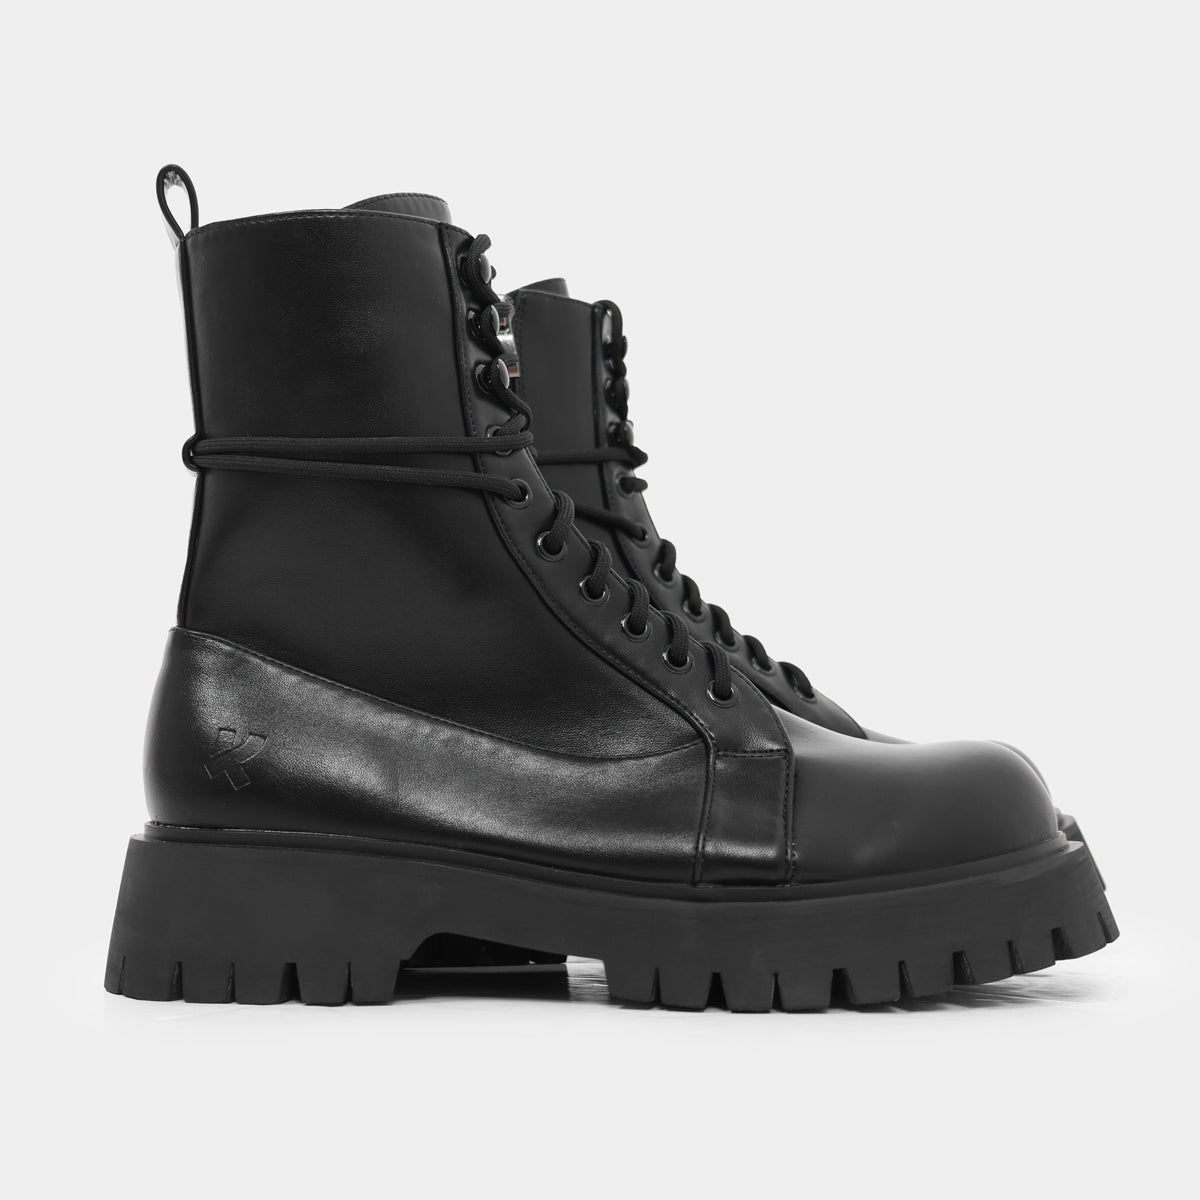 Electic Men's Military Boots - Ankle Boots - KOI Footwear - Black - Side Platform View